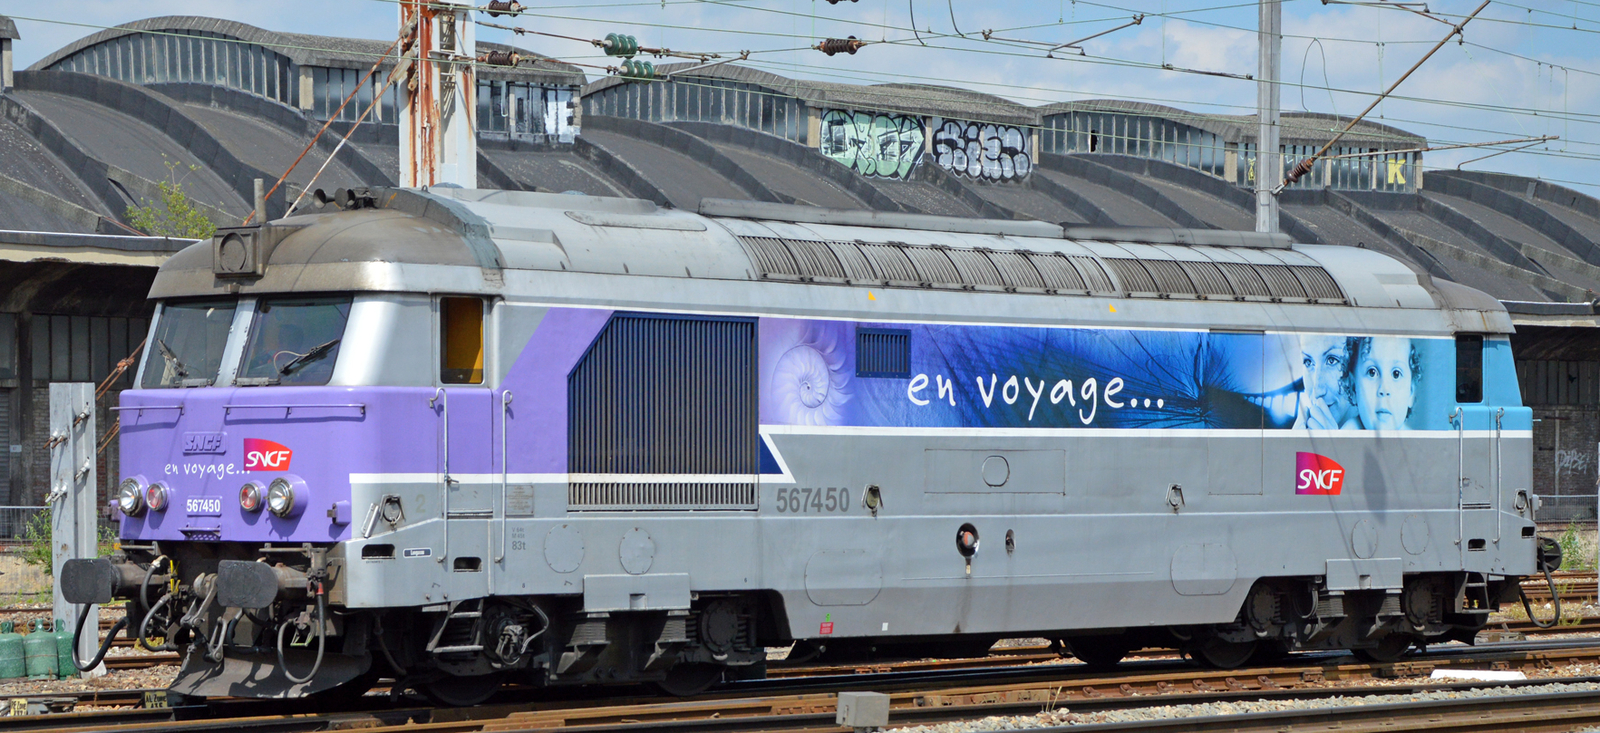 BB 67450 in June 2015 at Amiens